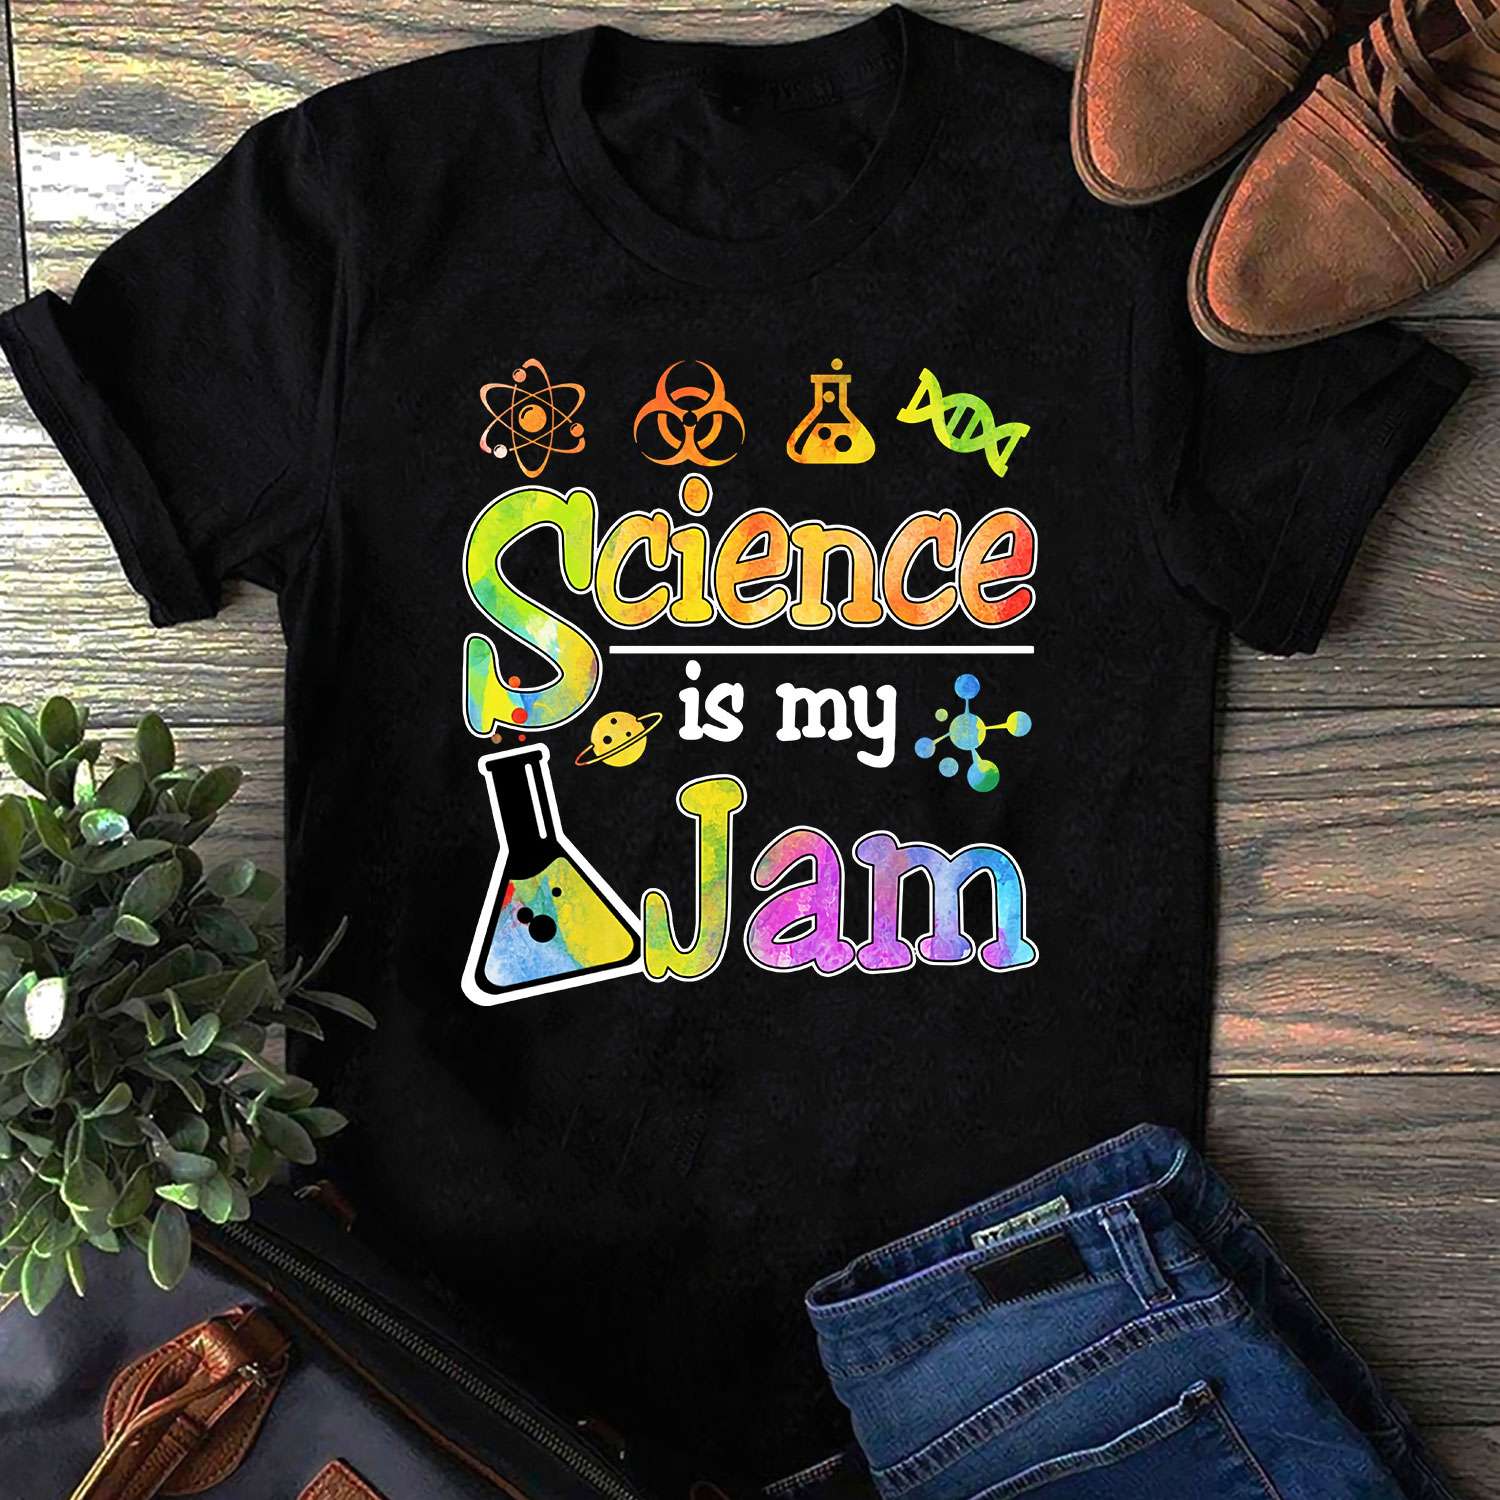 Science is my jam - Science subject lover, gift for scientist